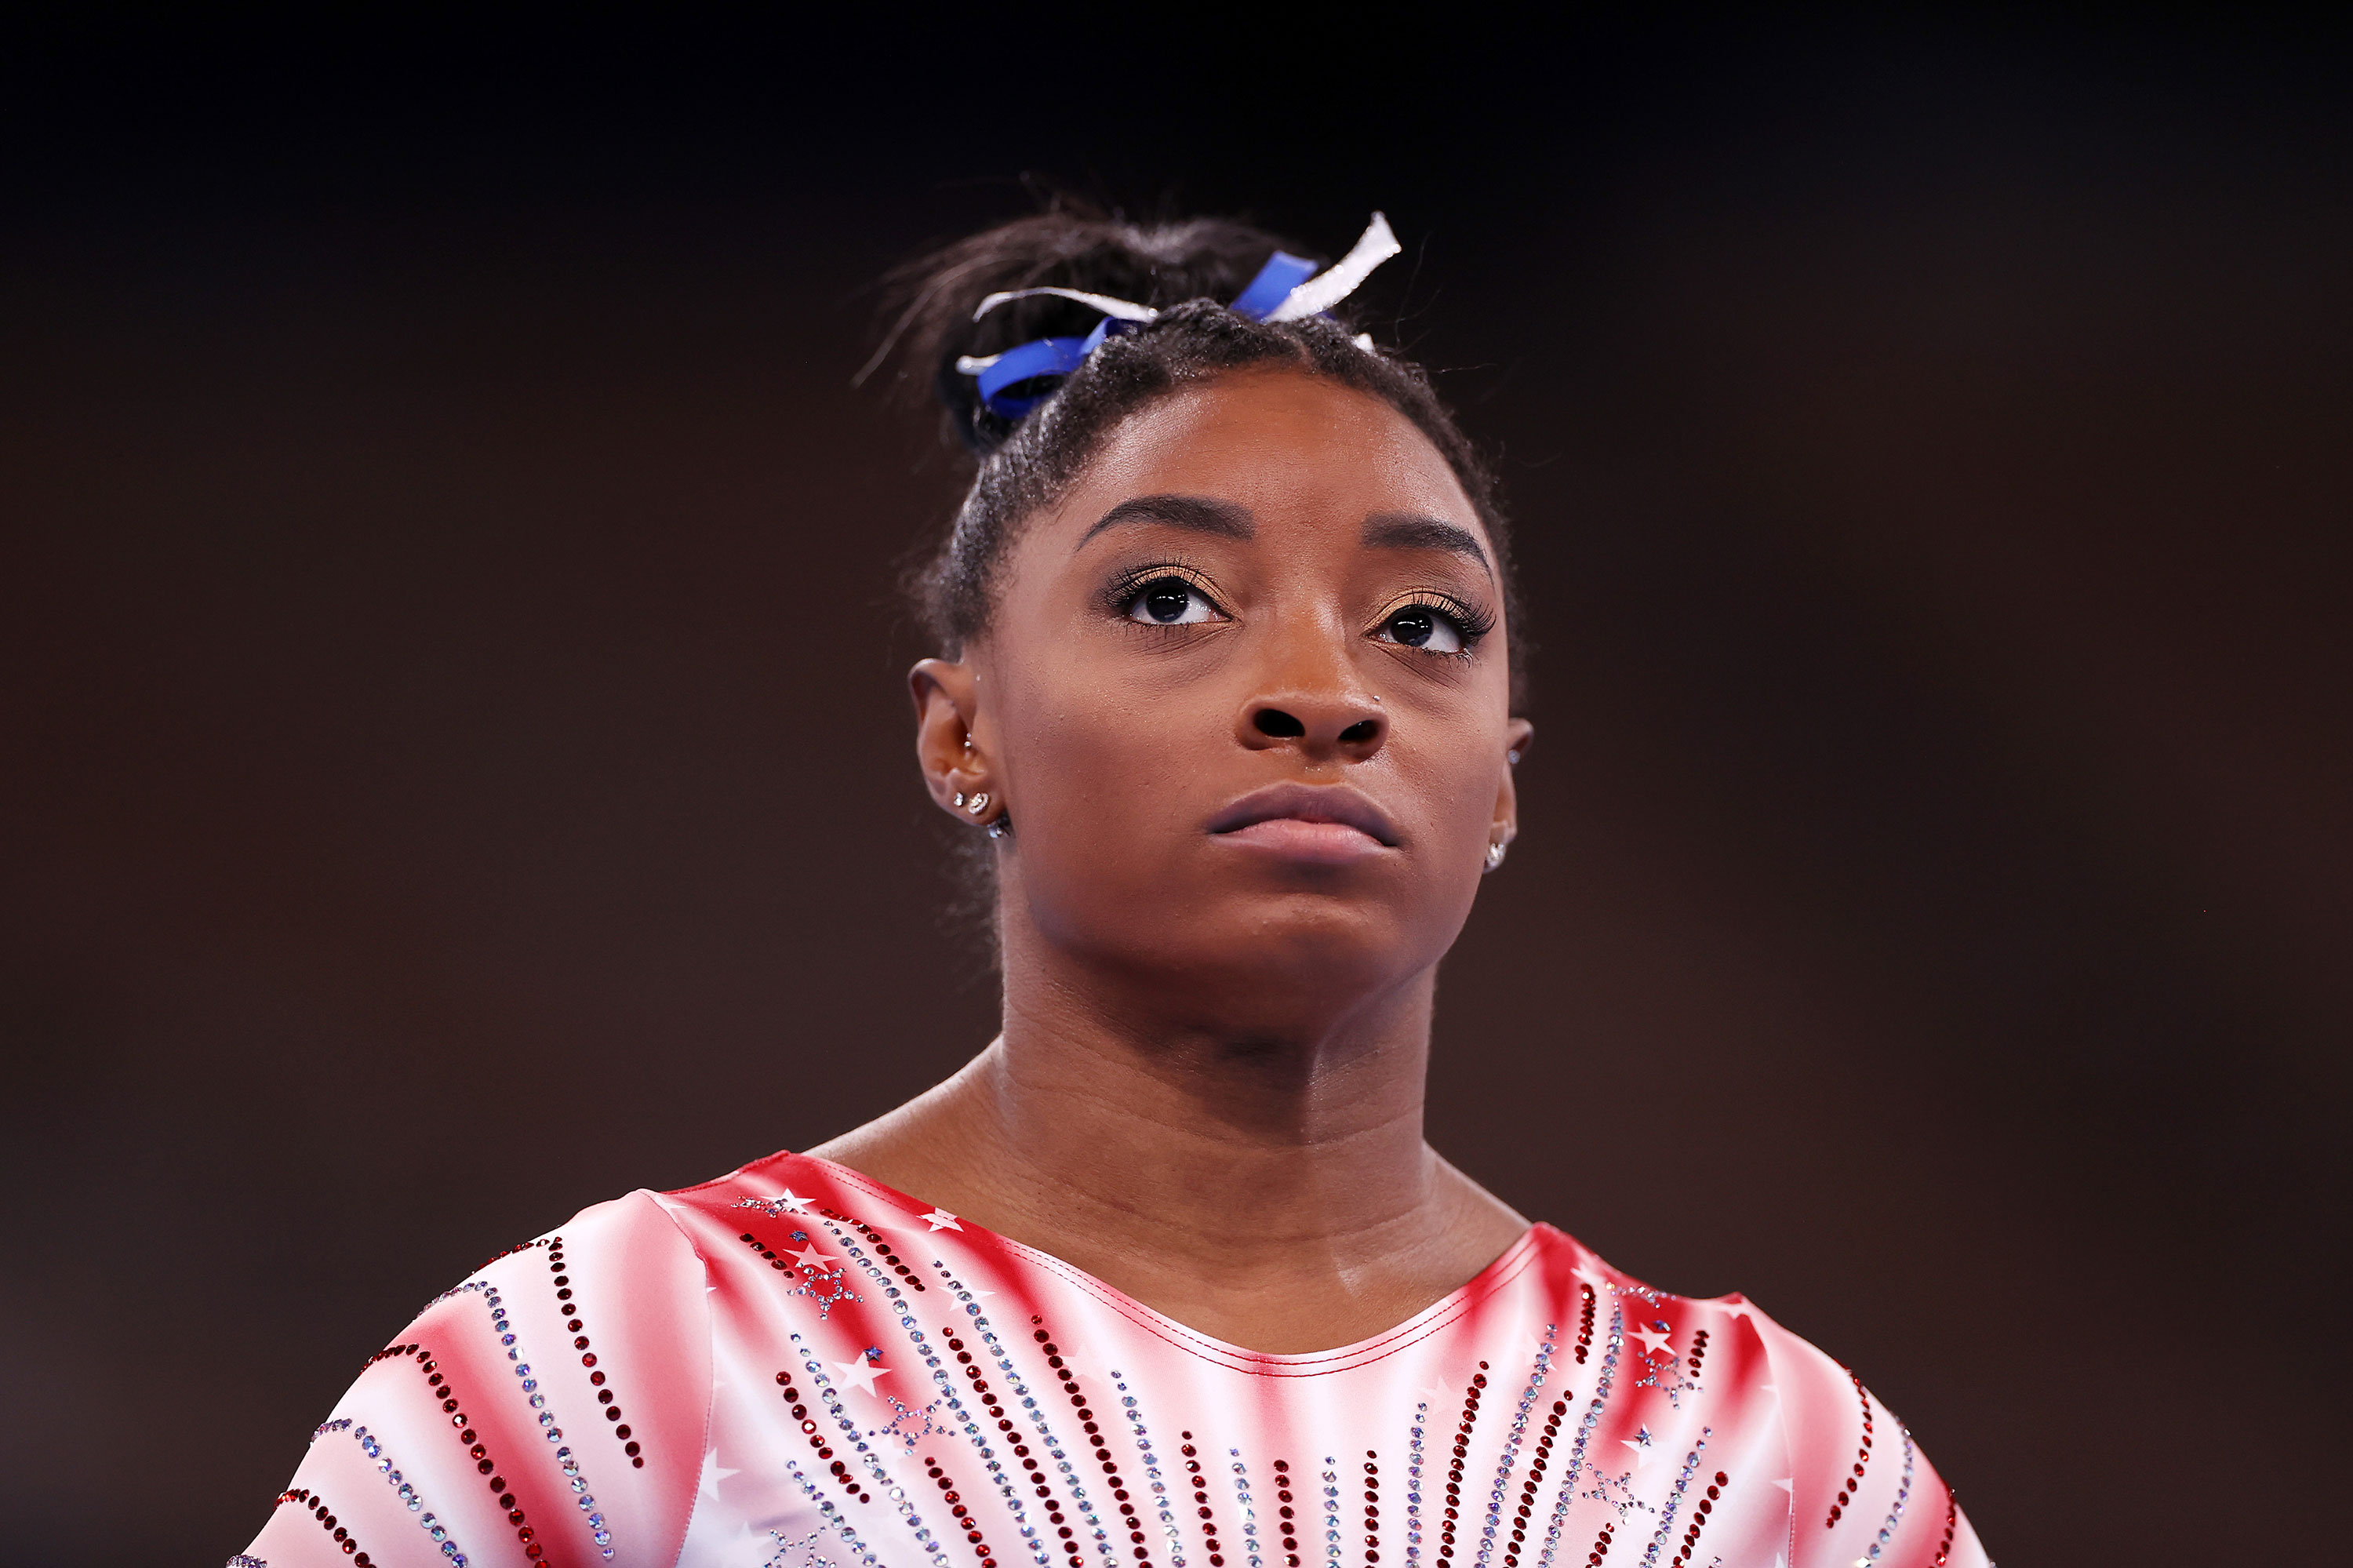 American Simone Biles is seen during warm-ups prior to the balance beam final on August 3.